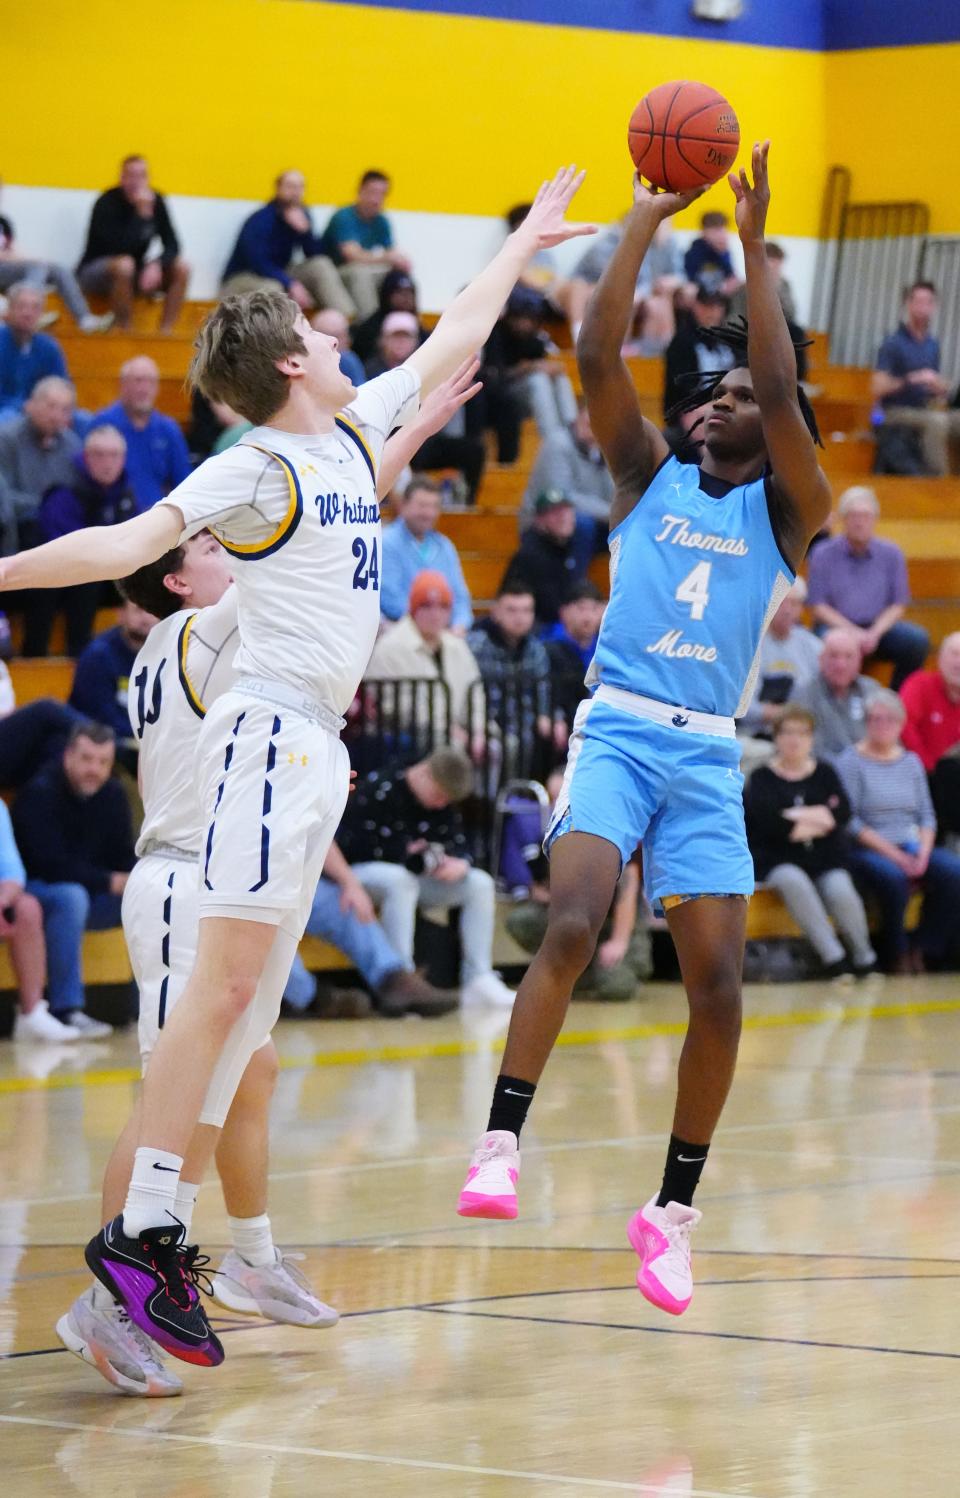 Amari McCottry's play has helped elevate St. Thomas More to one of the state's best teams in Division 3.